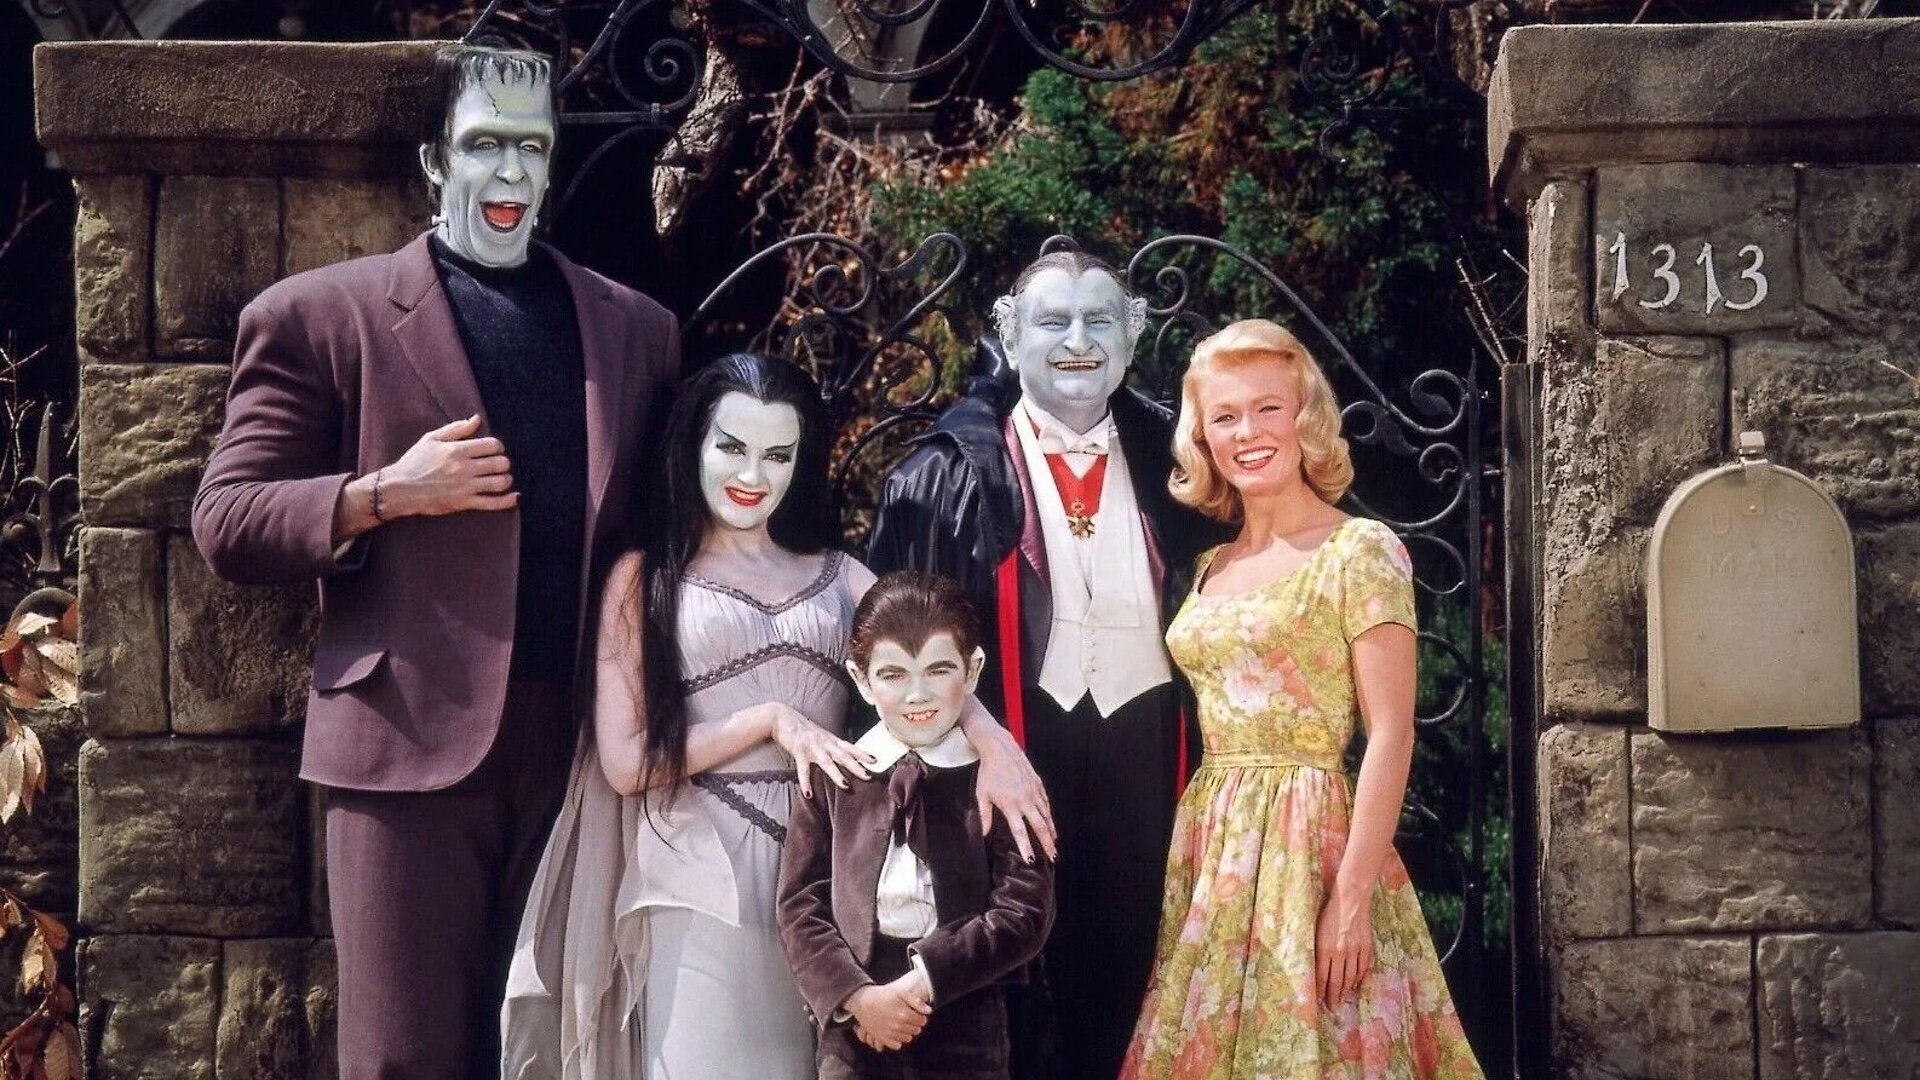 The Munsters, Movies, Rob Zombie, Munsters movie, 1920x1080 Full HD Desktop